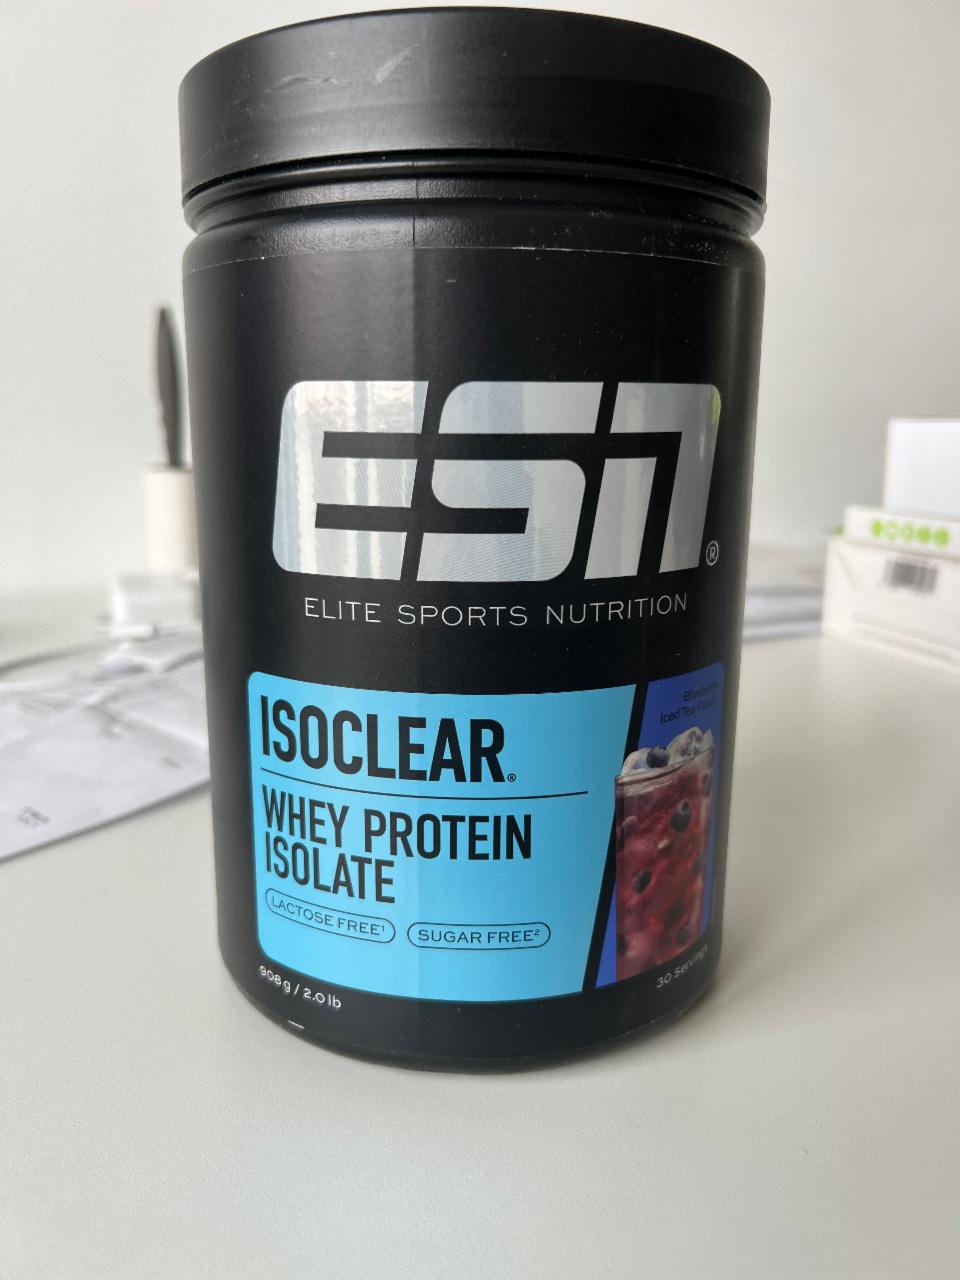 Fotografie - ISOCLEAR WHEY PROTEIN ISOLATE Blueberry Iced Tea Flavor ESN